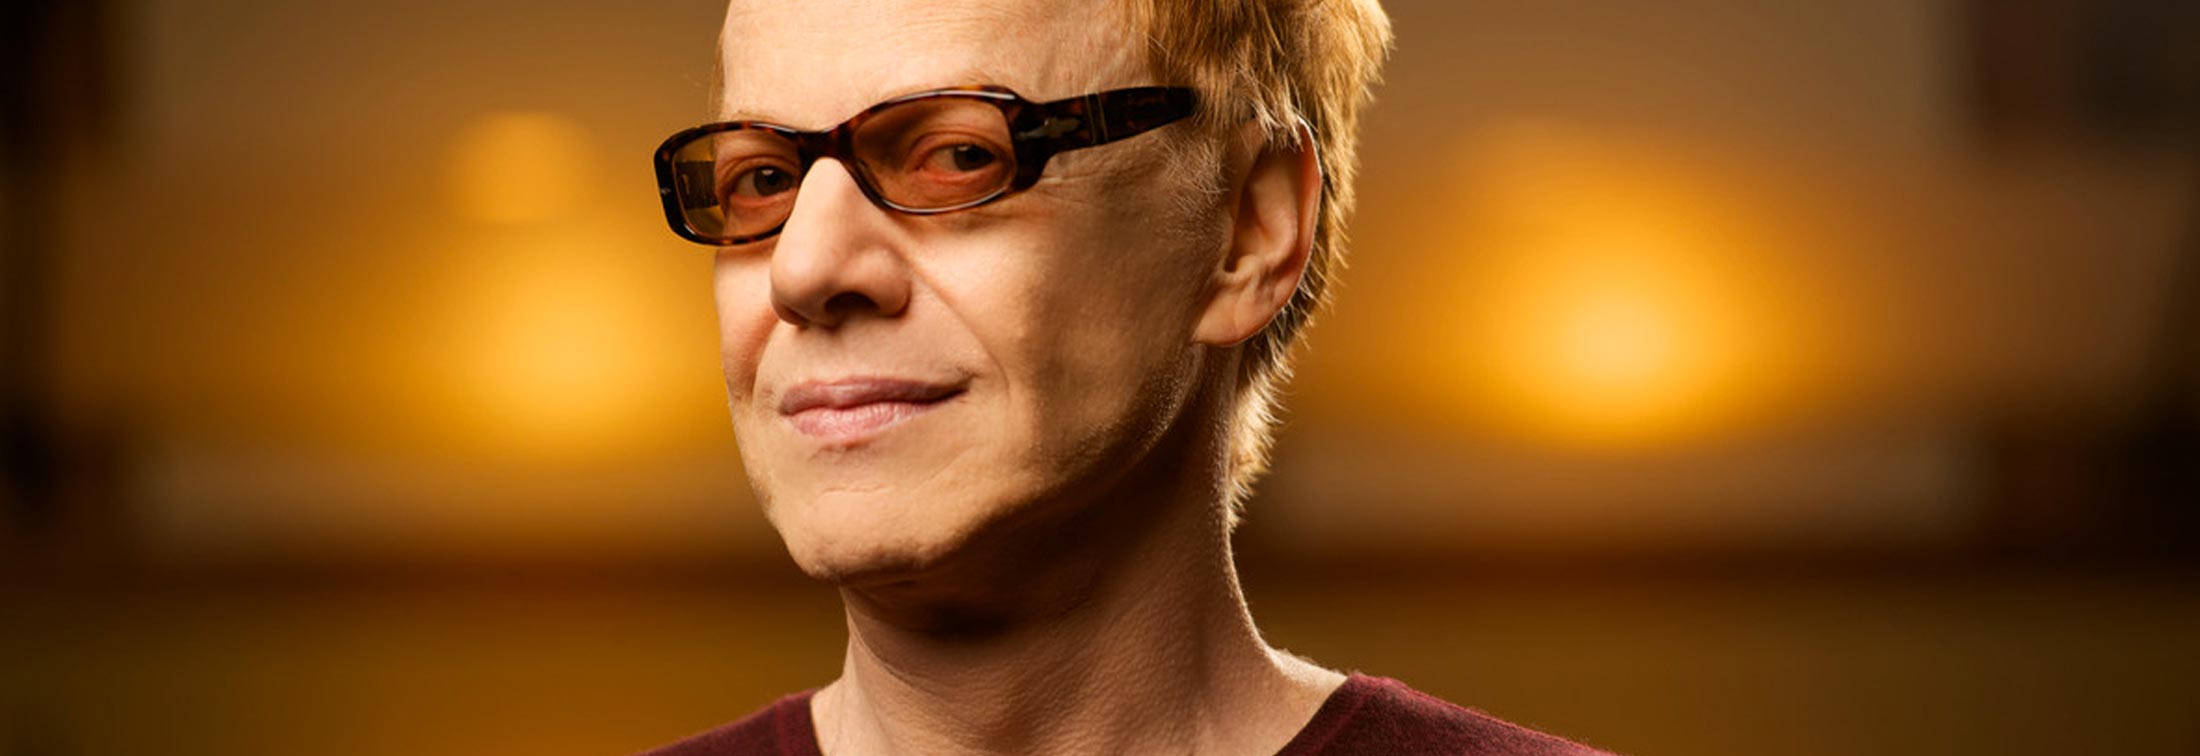 The Music of Danny Elfman - Celebrating the sounds of cinema on the great composer's birthday